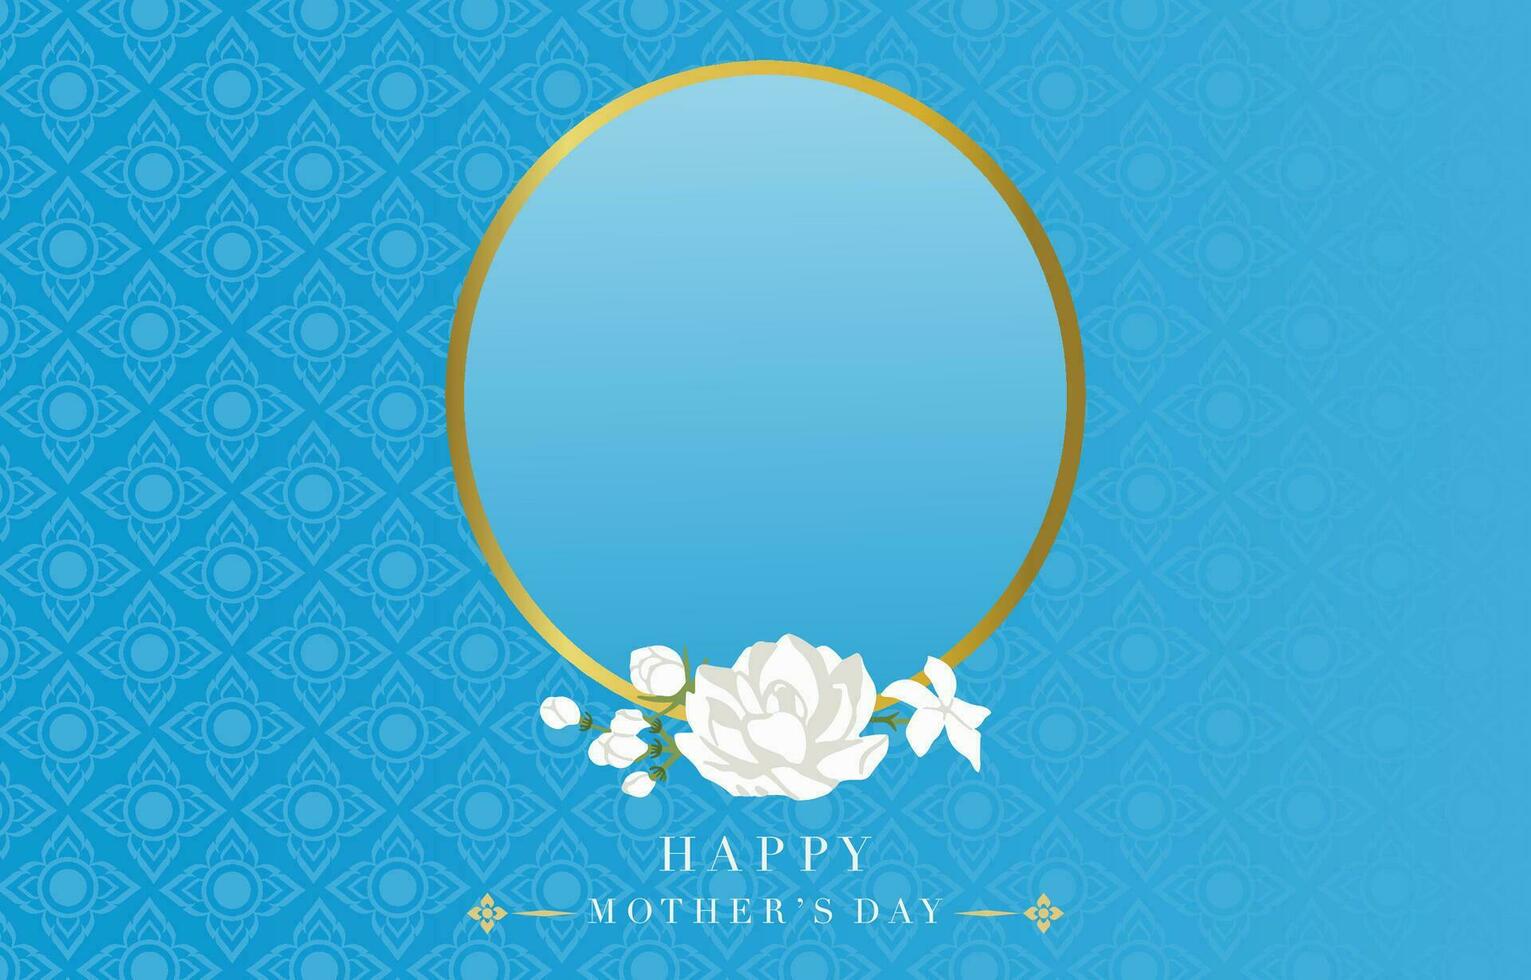 mother's day invitation with jasmine and ribbon vector